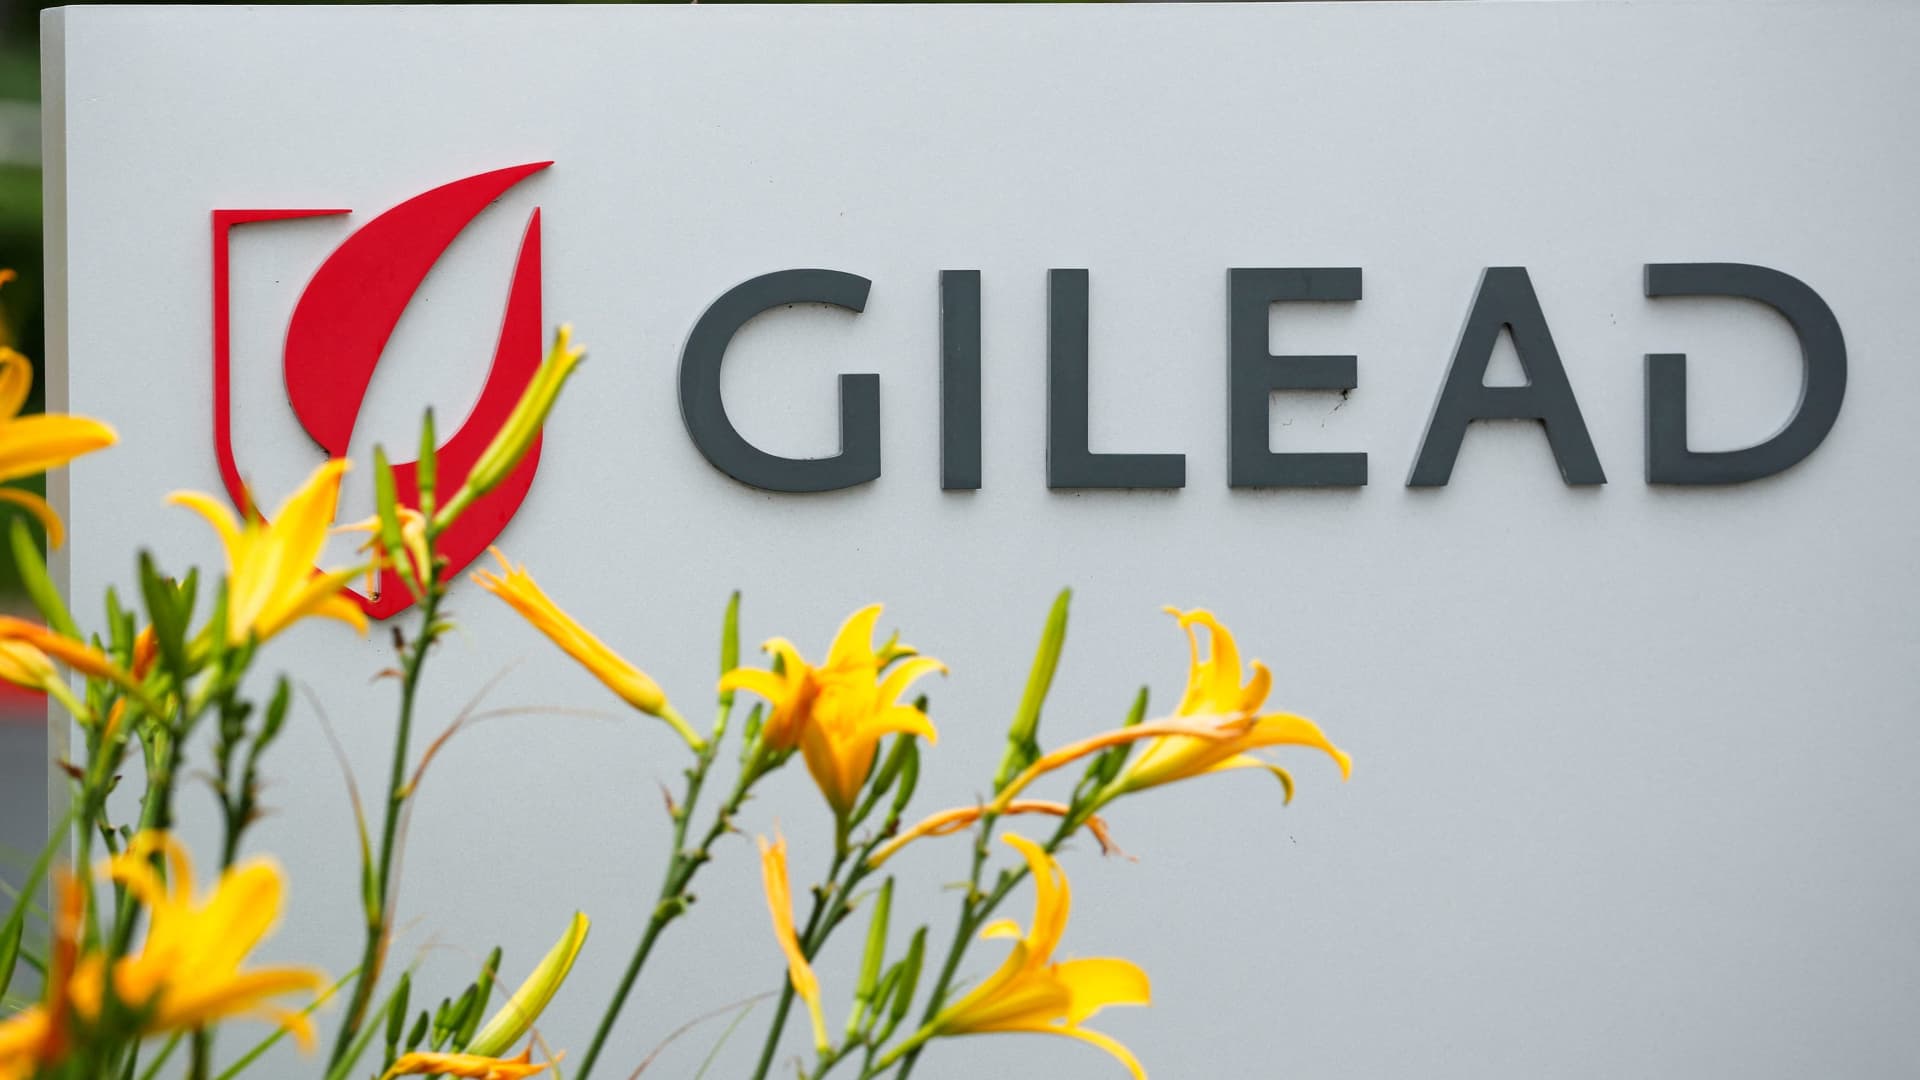 Gilead Sciences didn’t violate government patents on HIV prevention treatment, jury finds